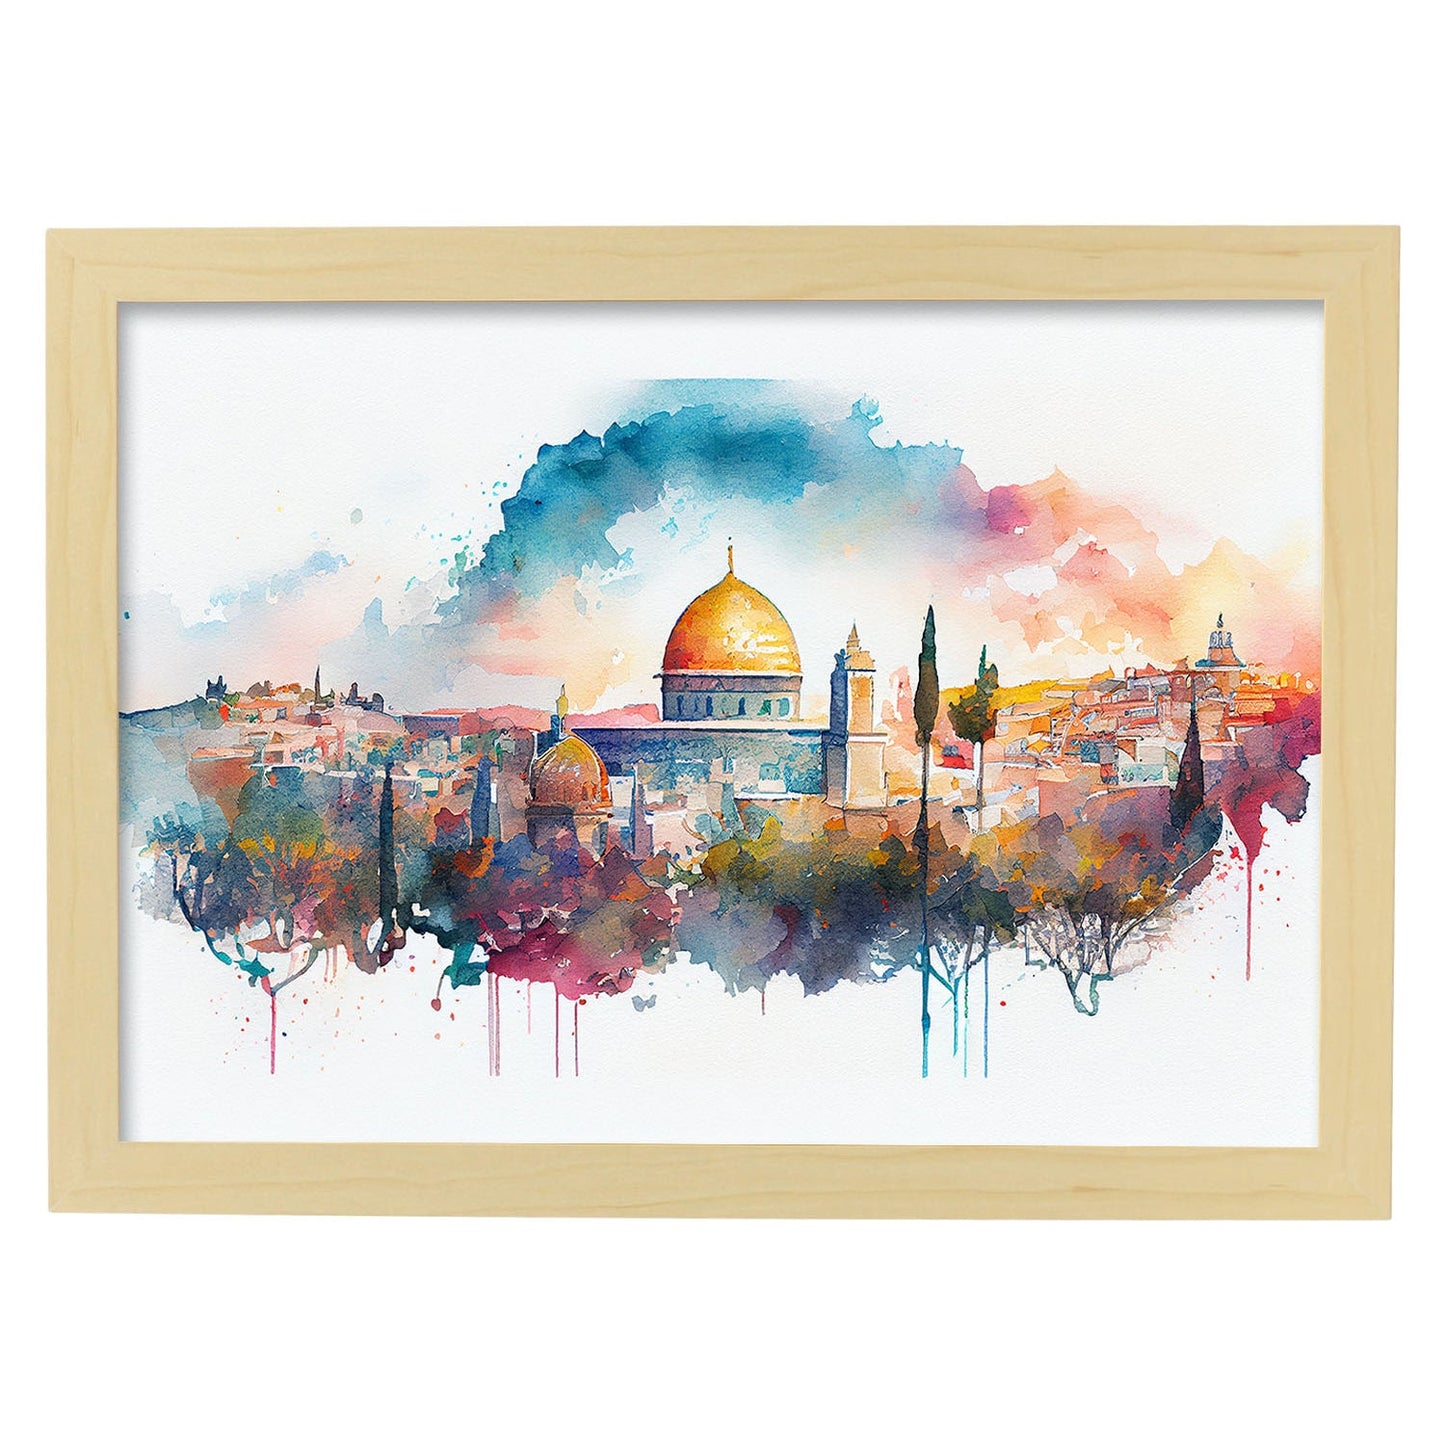 Nacnic watercolor of a skyline of the city of Jerusalem. Aesthetic Wall Art Prints for Bedroom or Living Room Design.-Artwork-Nacnic-A4-Marco Madera Clara-Nacnic Estudio SL